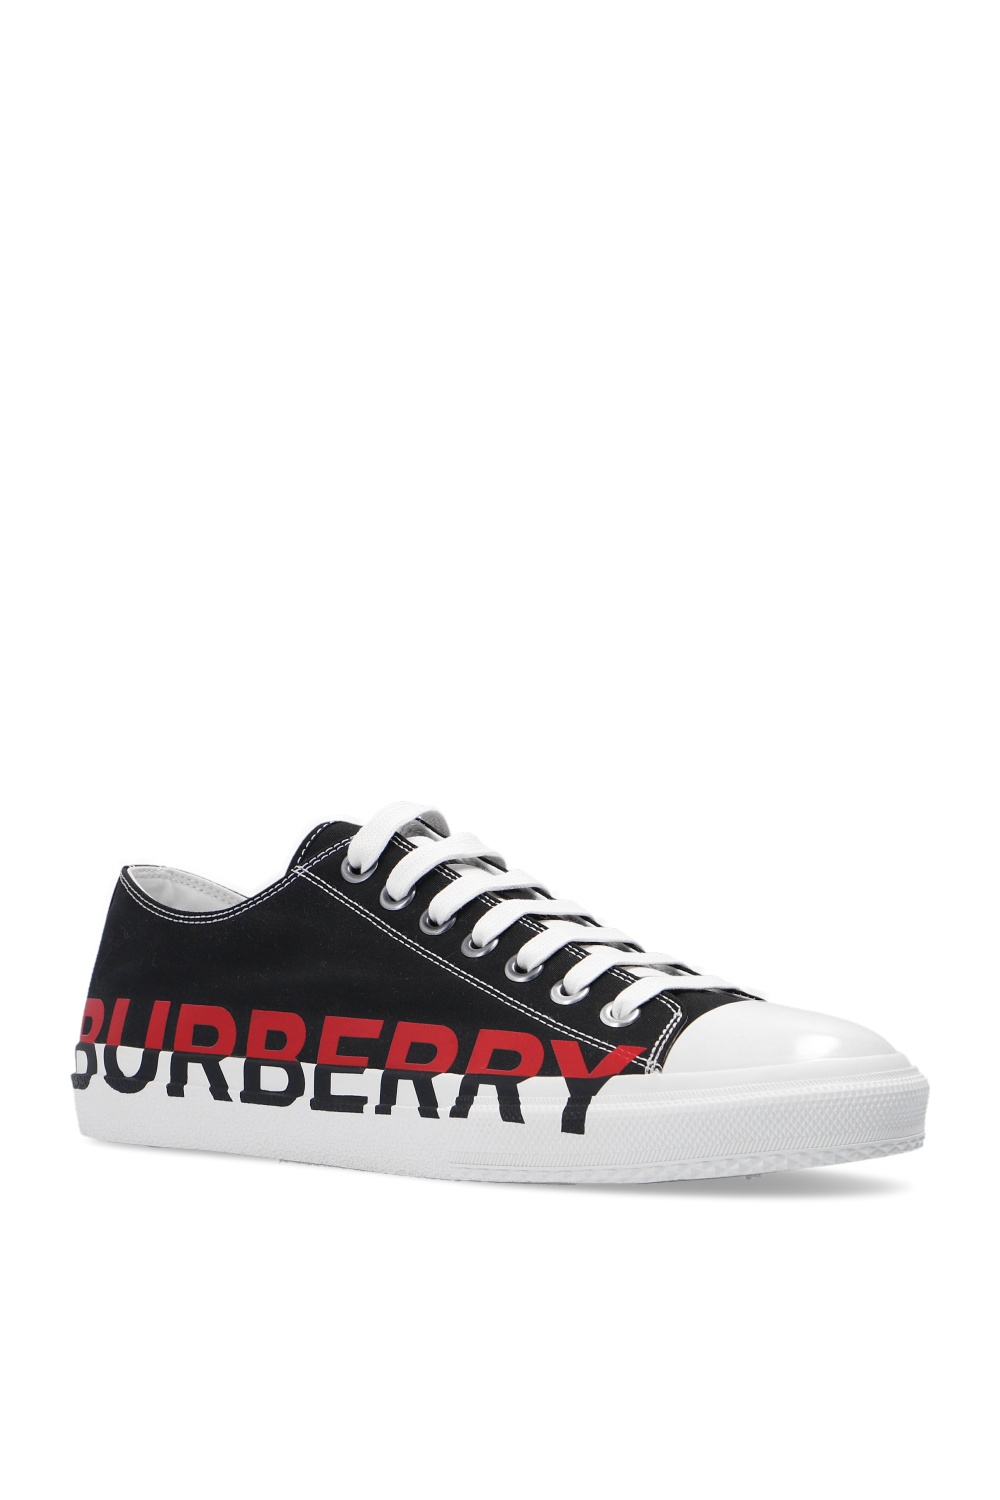 Burberry Sneakers with logo | Men's Shoes | Vitkac